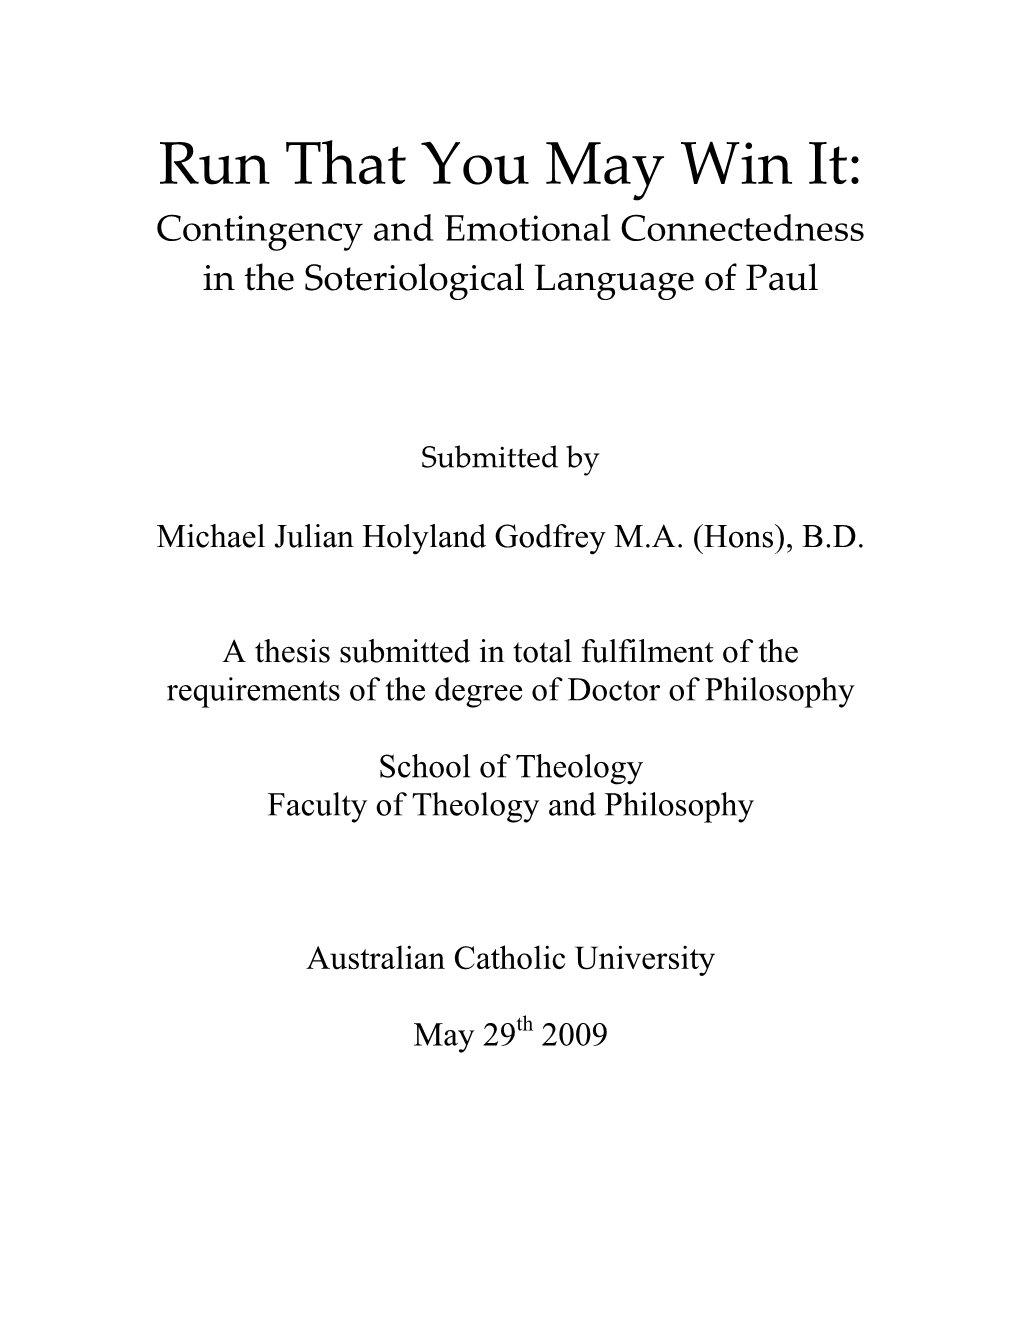 Run That You May Win It: Contingency and Emotional Connectedness in the Soteriological Language of Paul